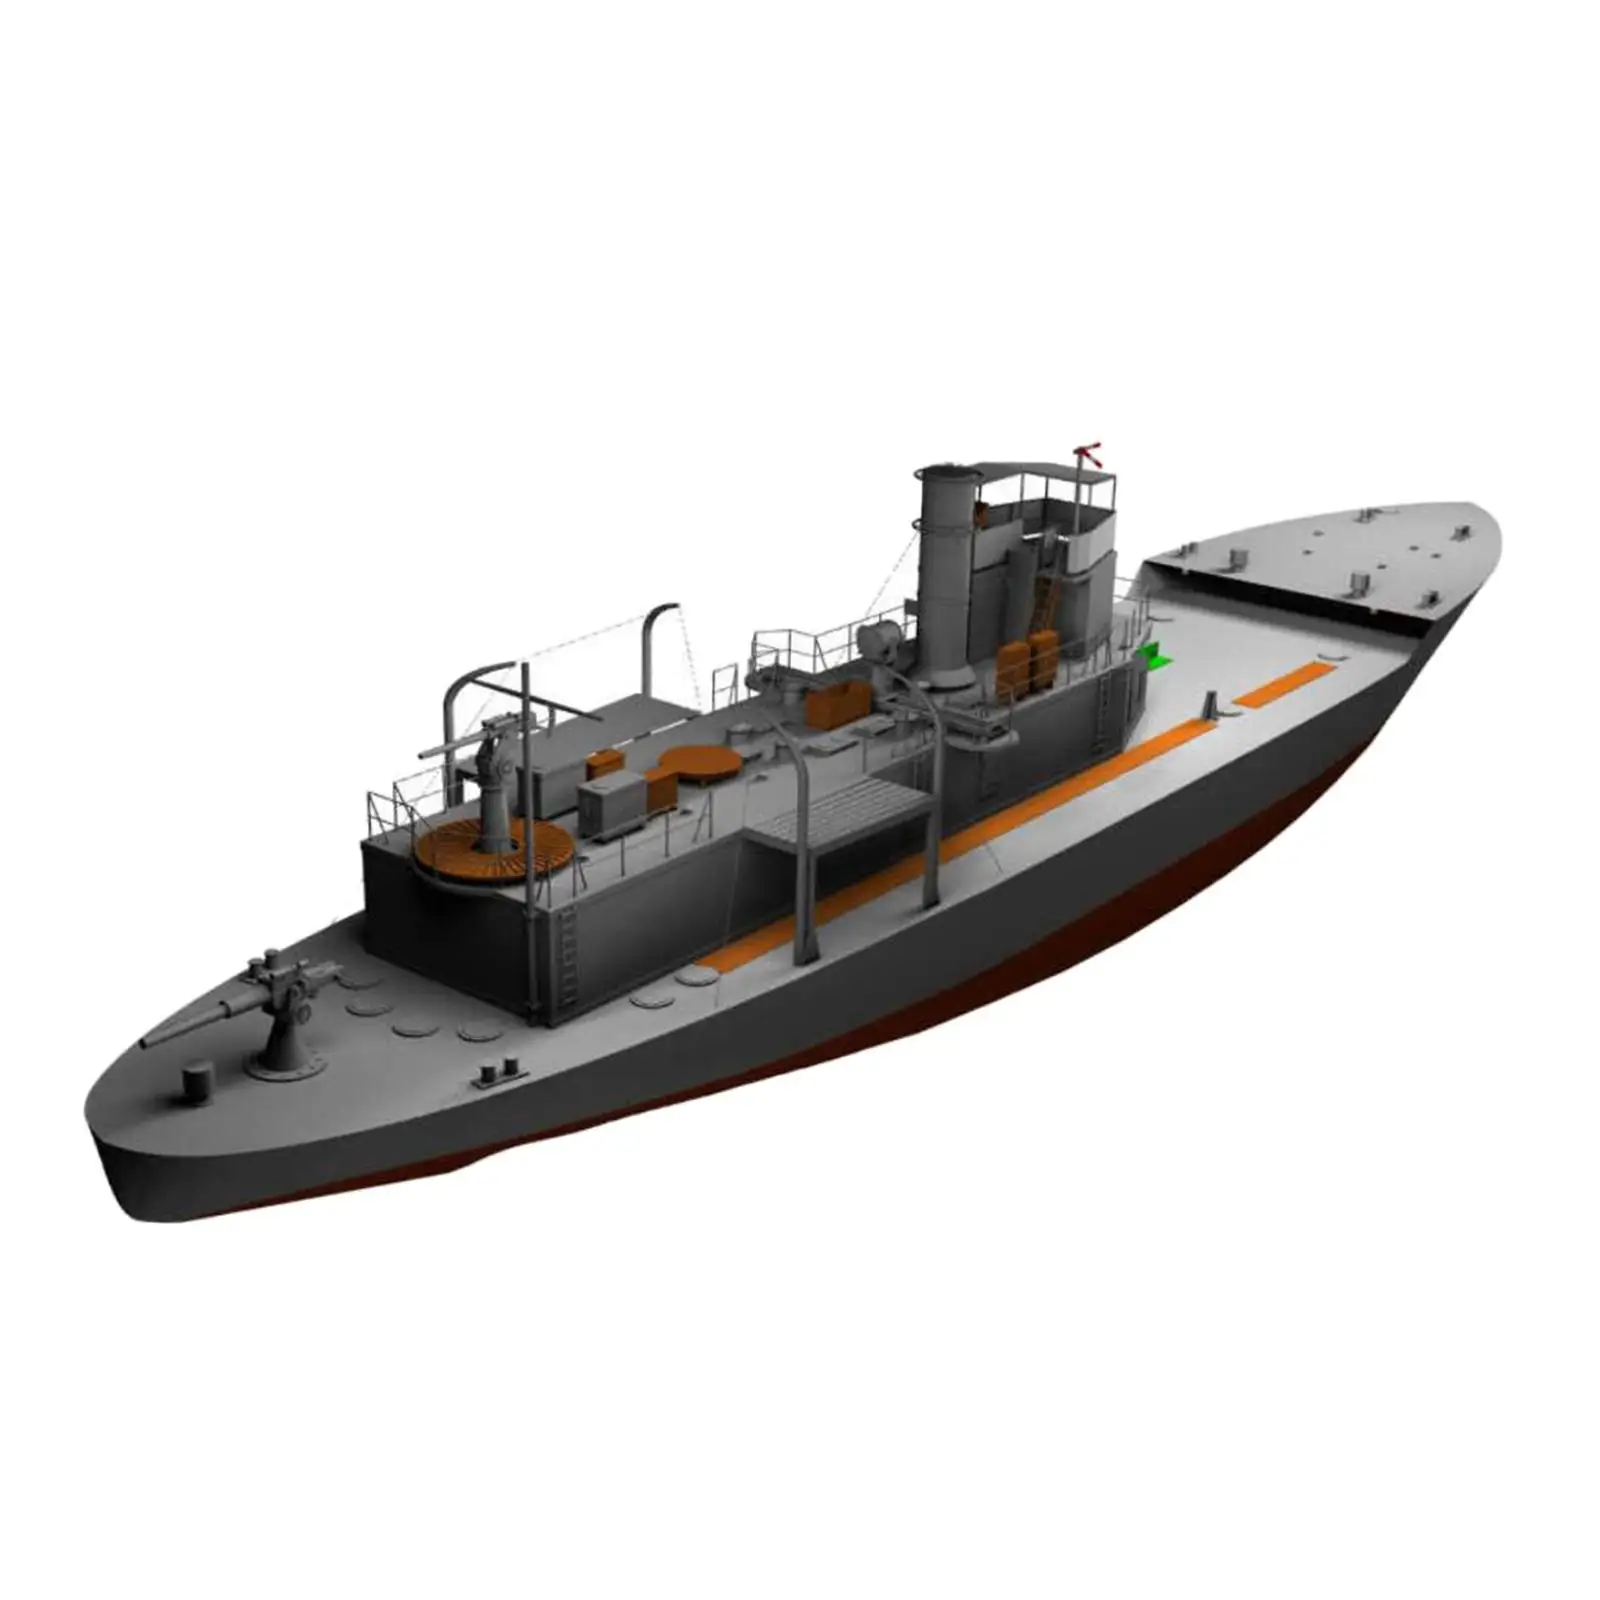 1:100 Brain Teaser Puzzle Ship and Boat Jigsaw Puzzles Patrol Boat Scale Model for Adults Kids Children Home Decoration Gift